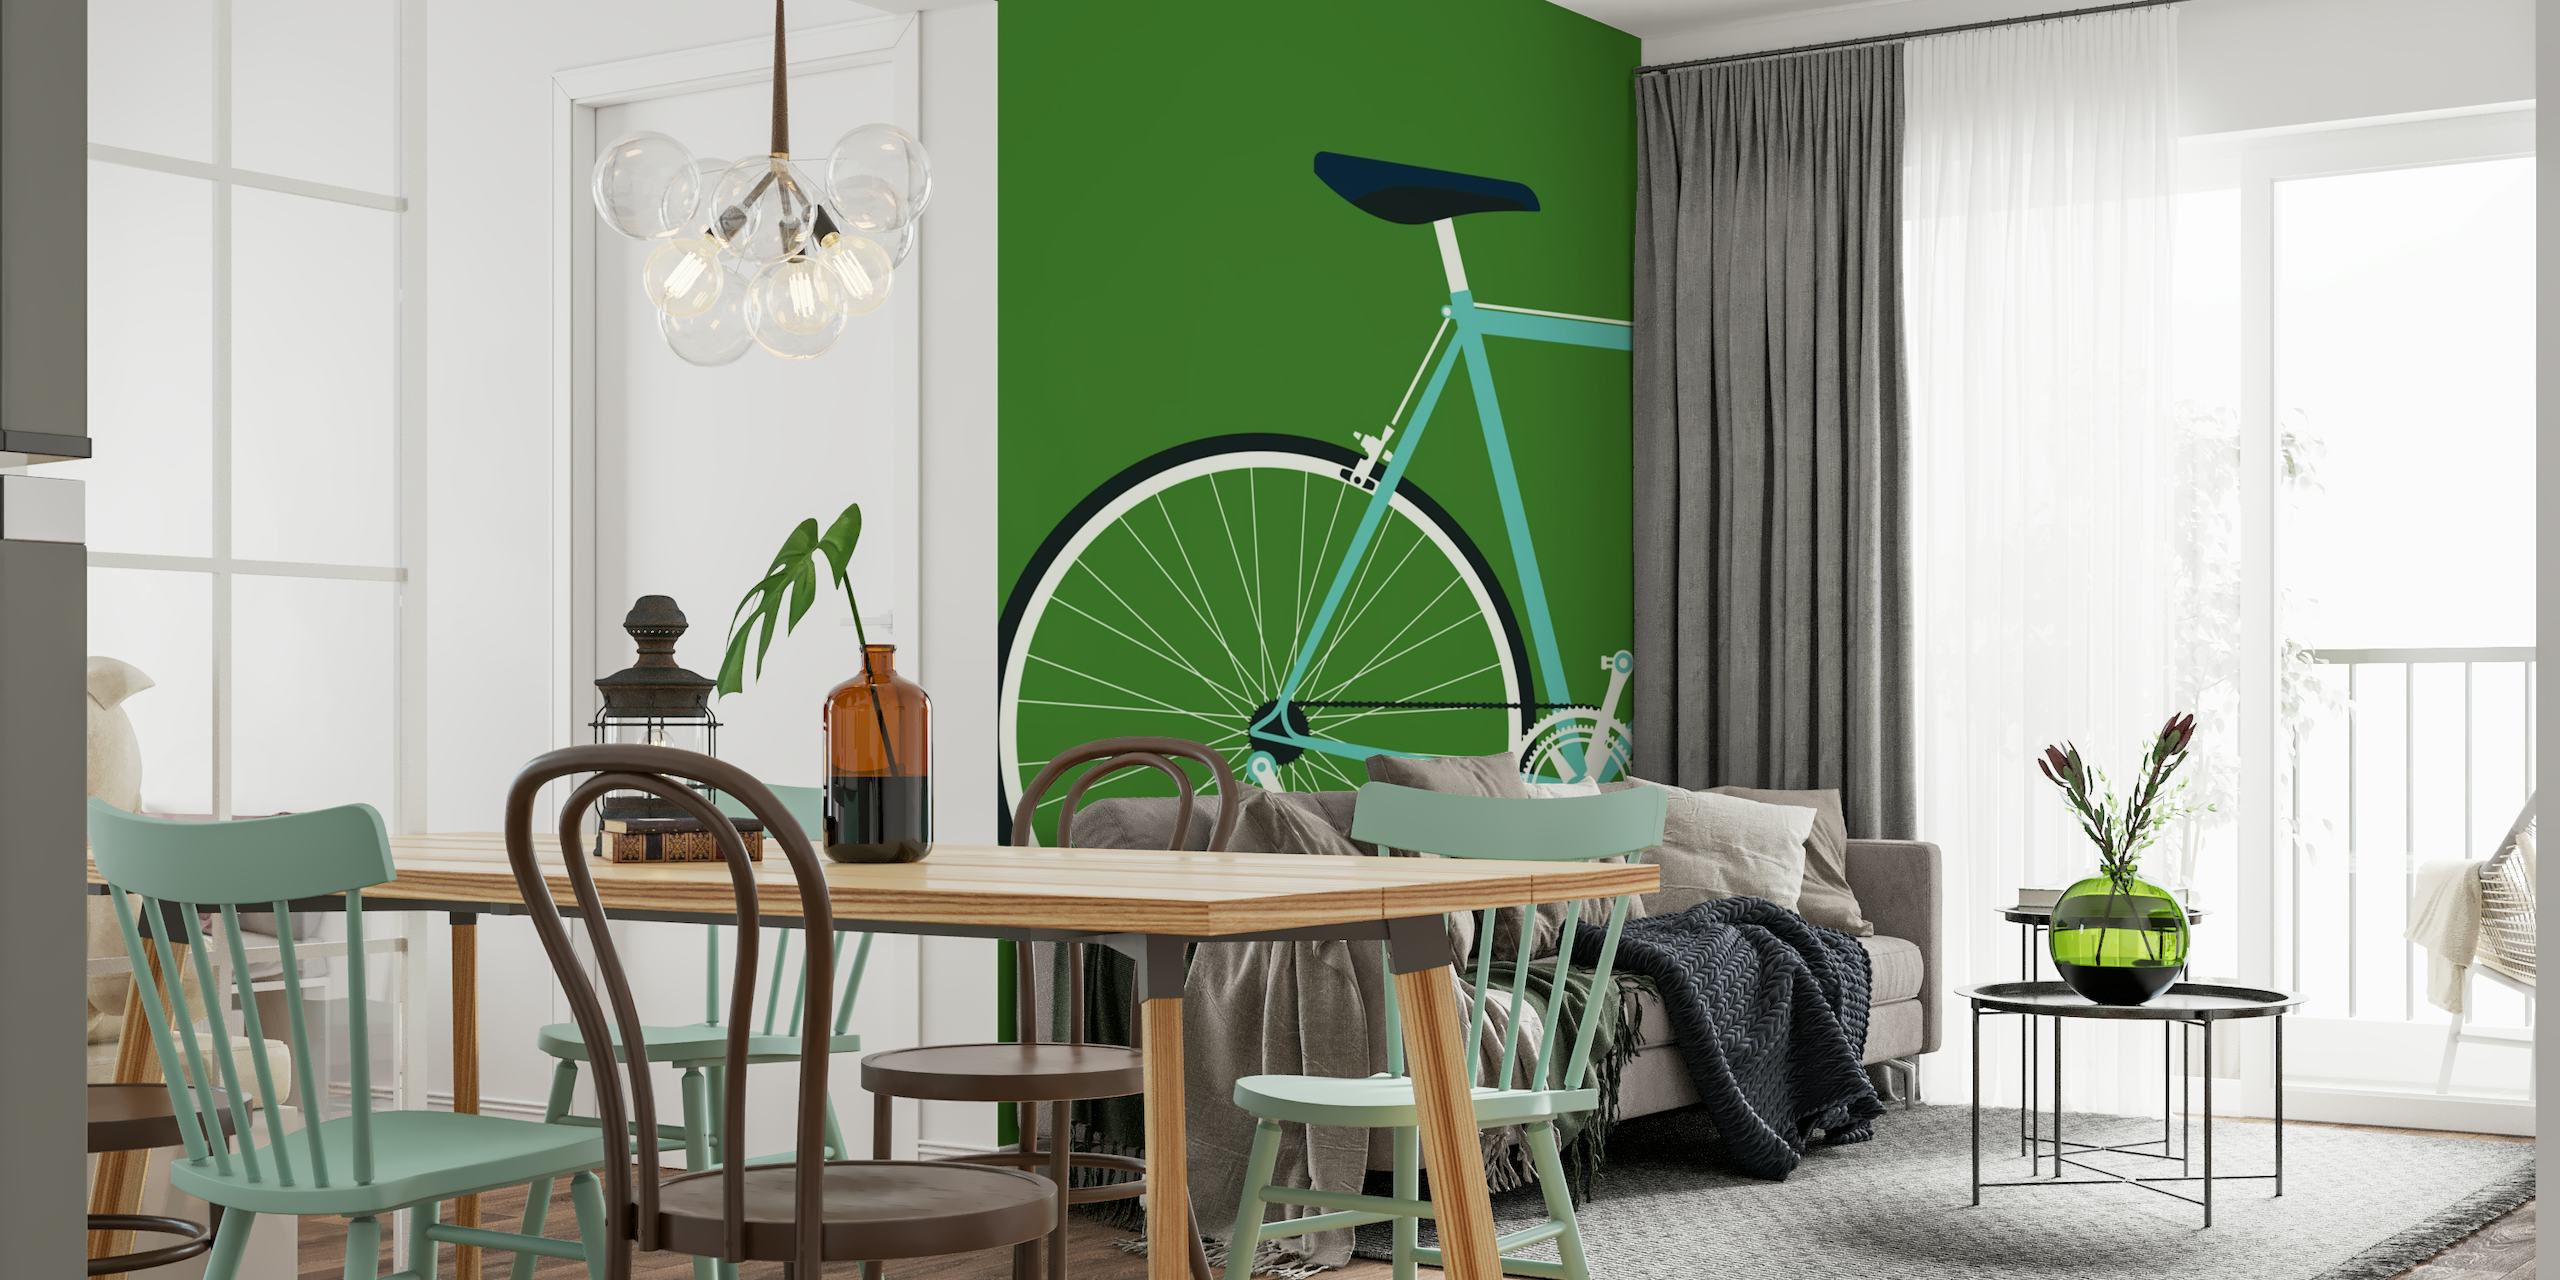 Bianchi Rear wall mural featuring a stylized bicycle silhouette on a green background